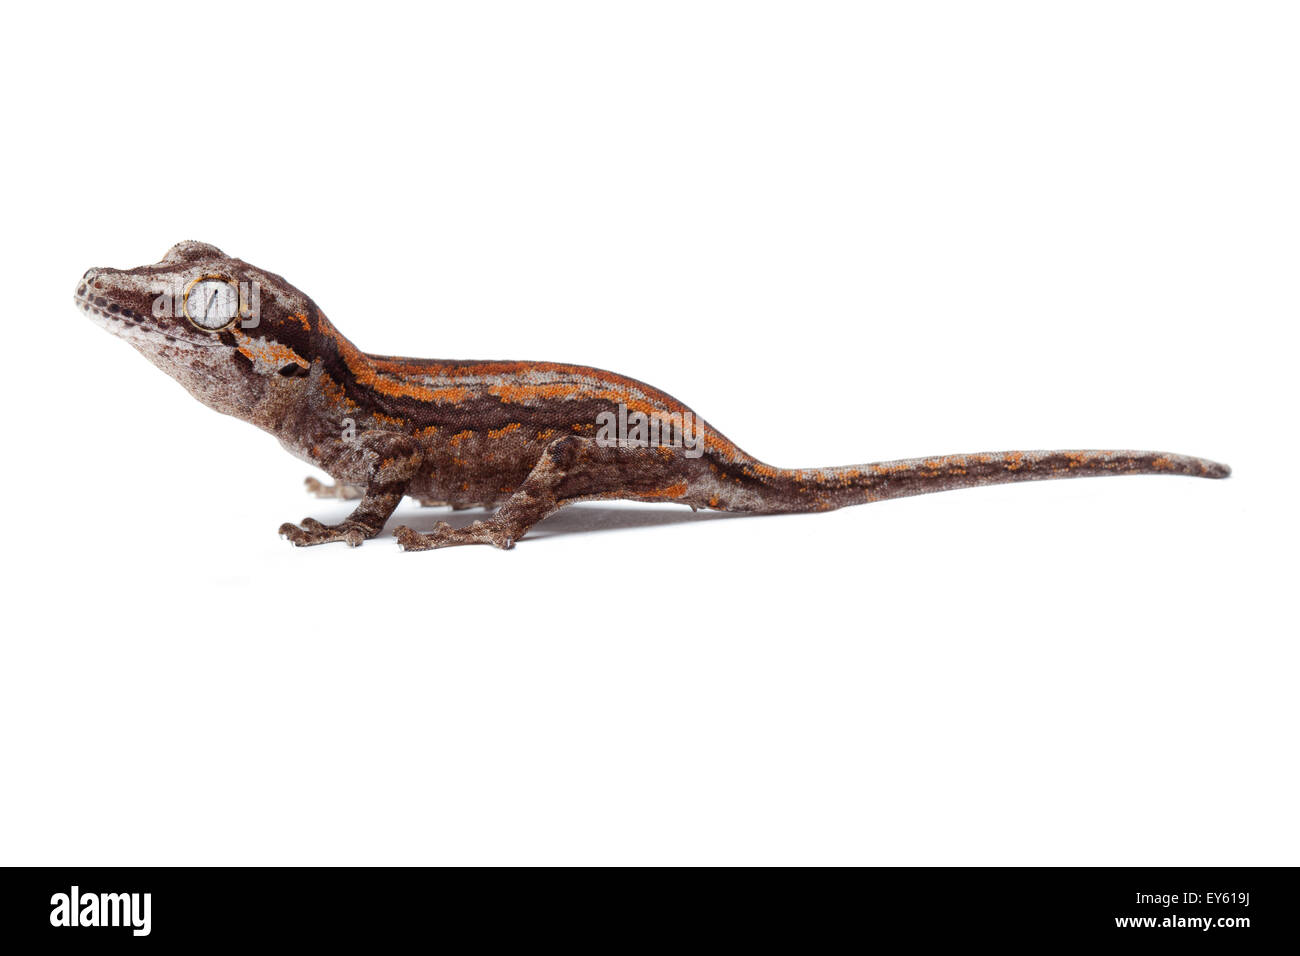 New Caledonian Bumpy Gecko 'Red' on white background Stock Photo